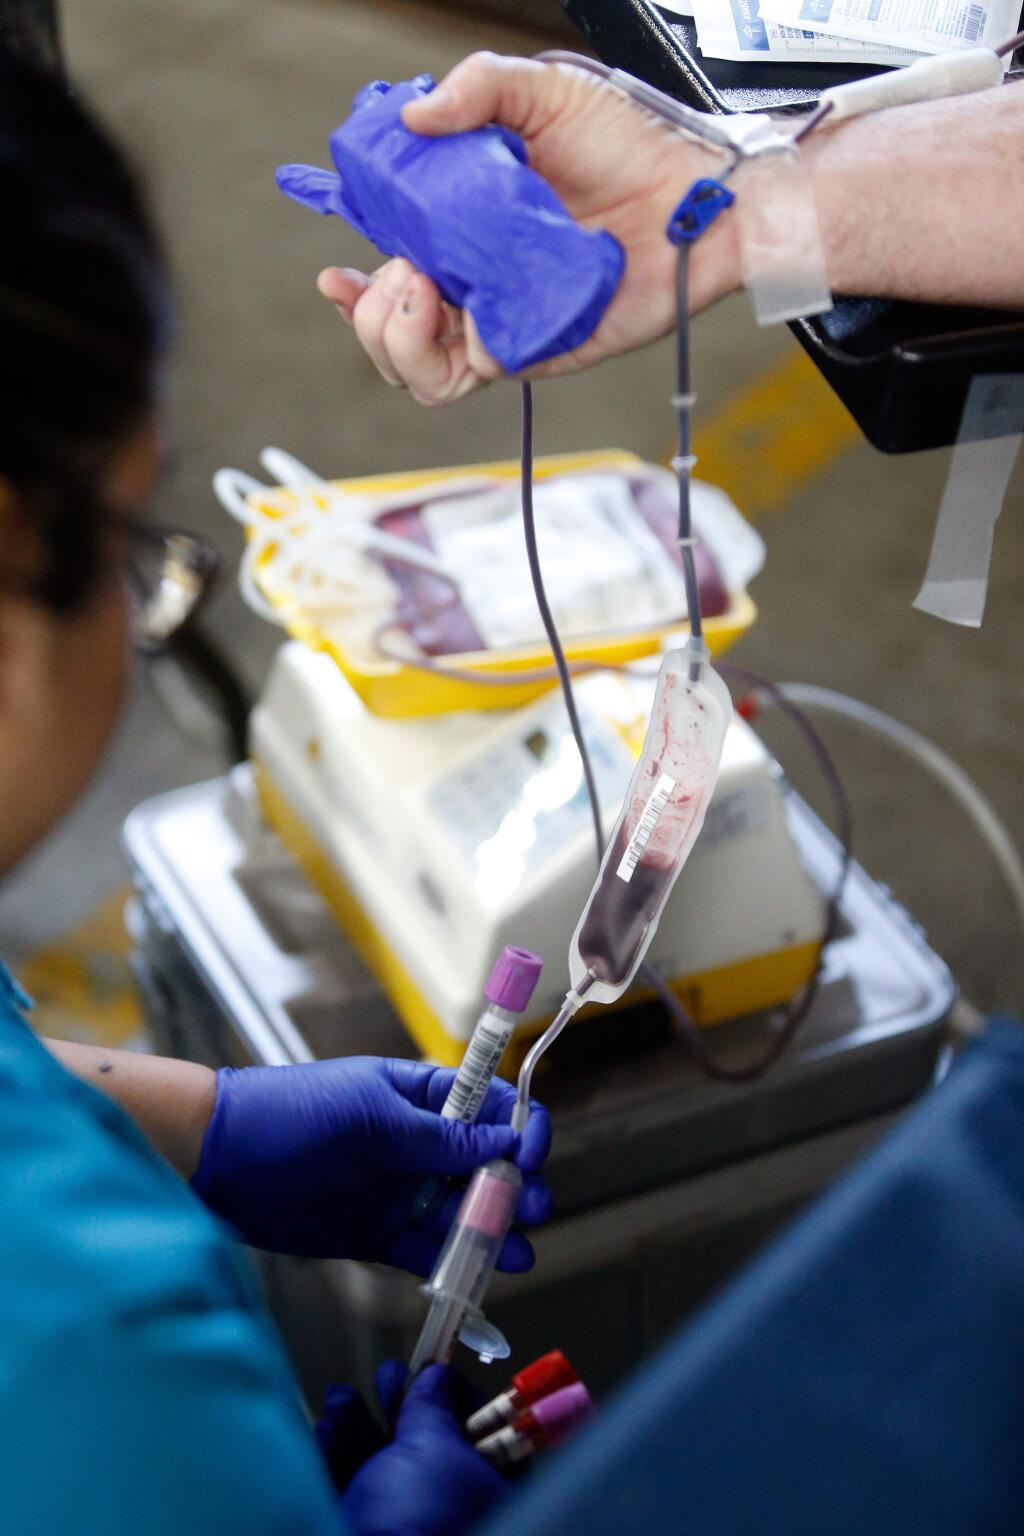 Phlebotomist Alejandra Orozco takes a blood donation from Rohnert Park fire marshal Jim Thompson during the 12th annual Bucket Brigade blood drive challenge at Rohnert Park Fire Station 2, in Rohnert Park, California on Saturday, January 6, 2018. (Alvin Jornada / The Press Democrat)